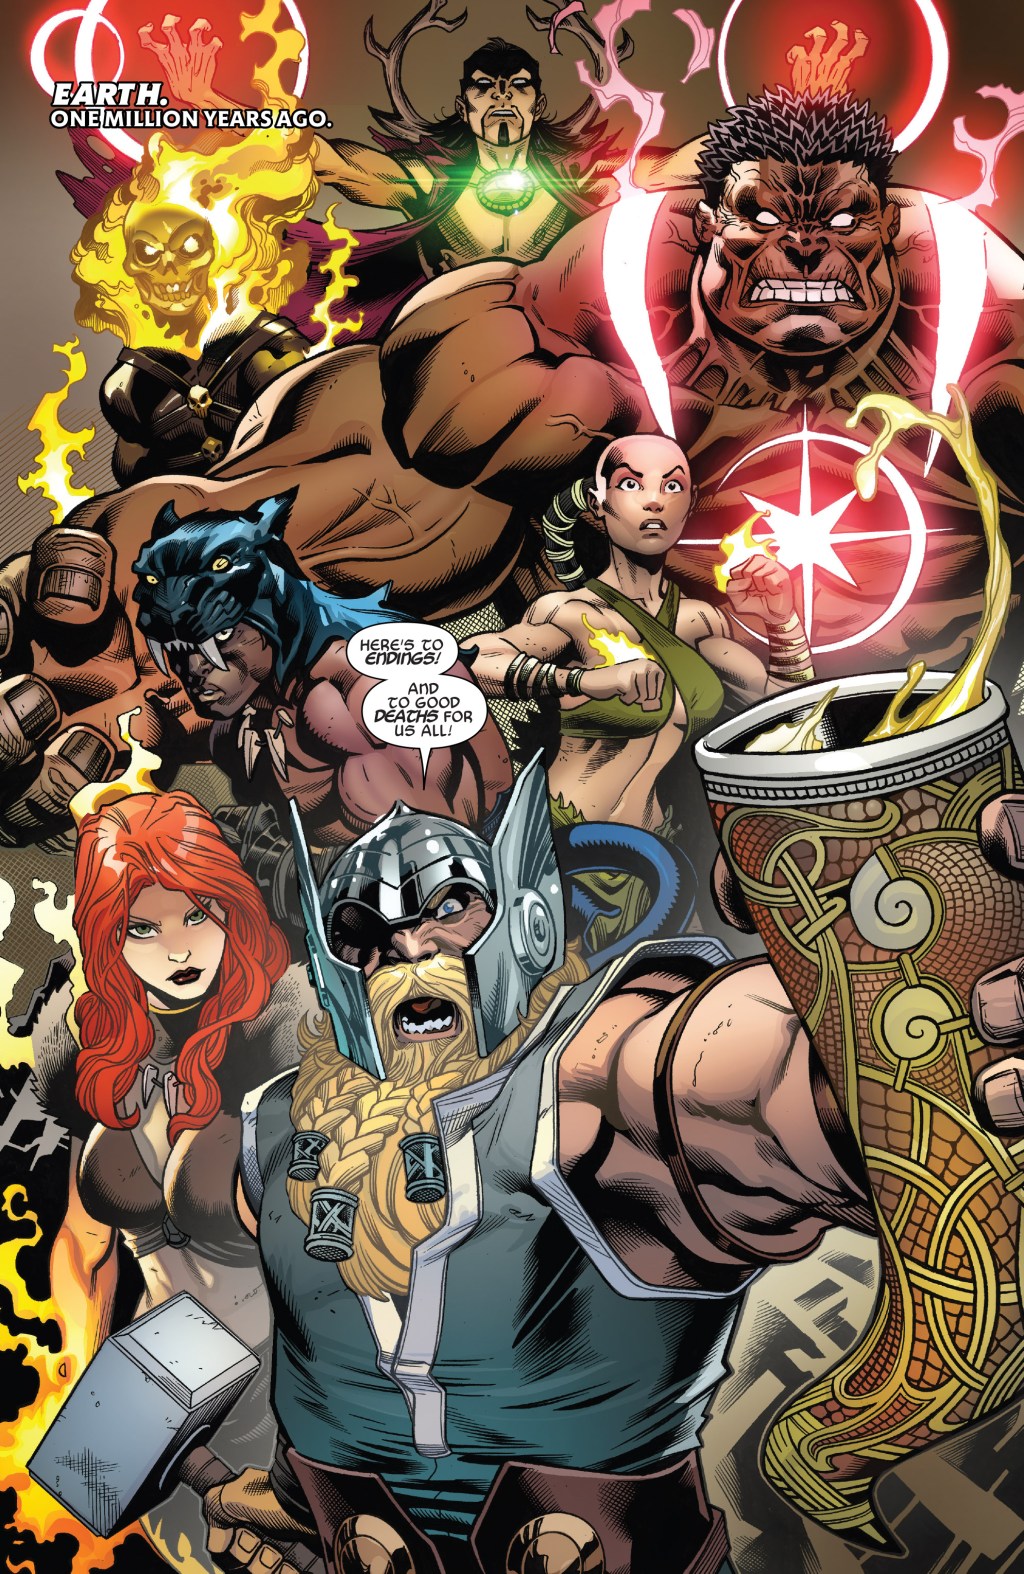 The Avengers of 1,000,000 B.C. assemble in Avengers Vol. 8 #1 "The Final Host" (2018), Marvel Comics. Words by Jason Aaron, art by Ed McGuinness, Mark Morales, David Curiel, and Cory Petit.